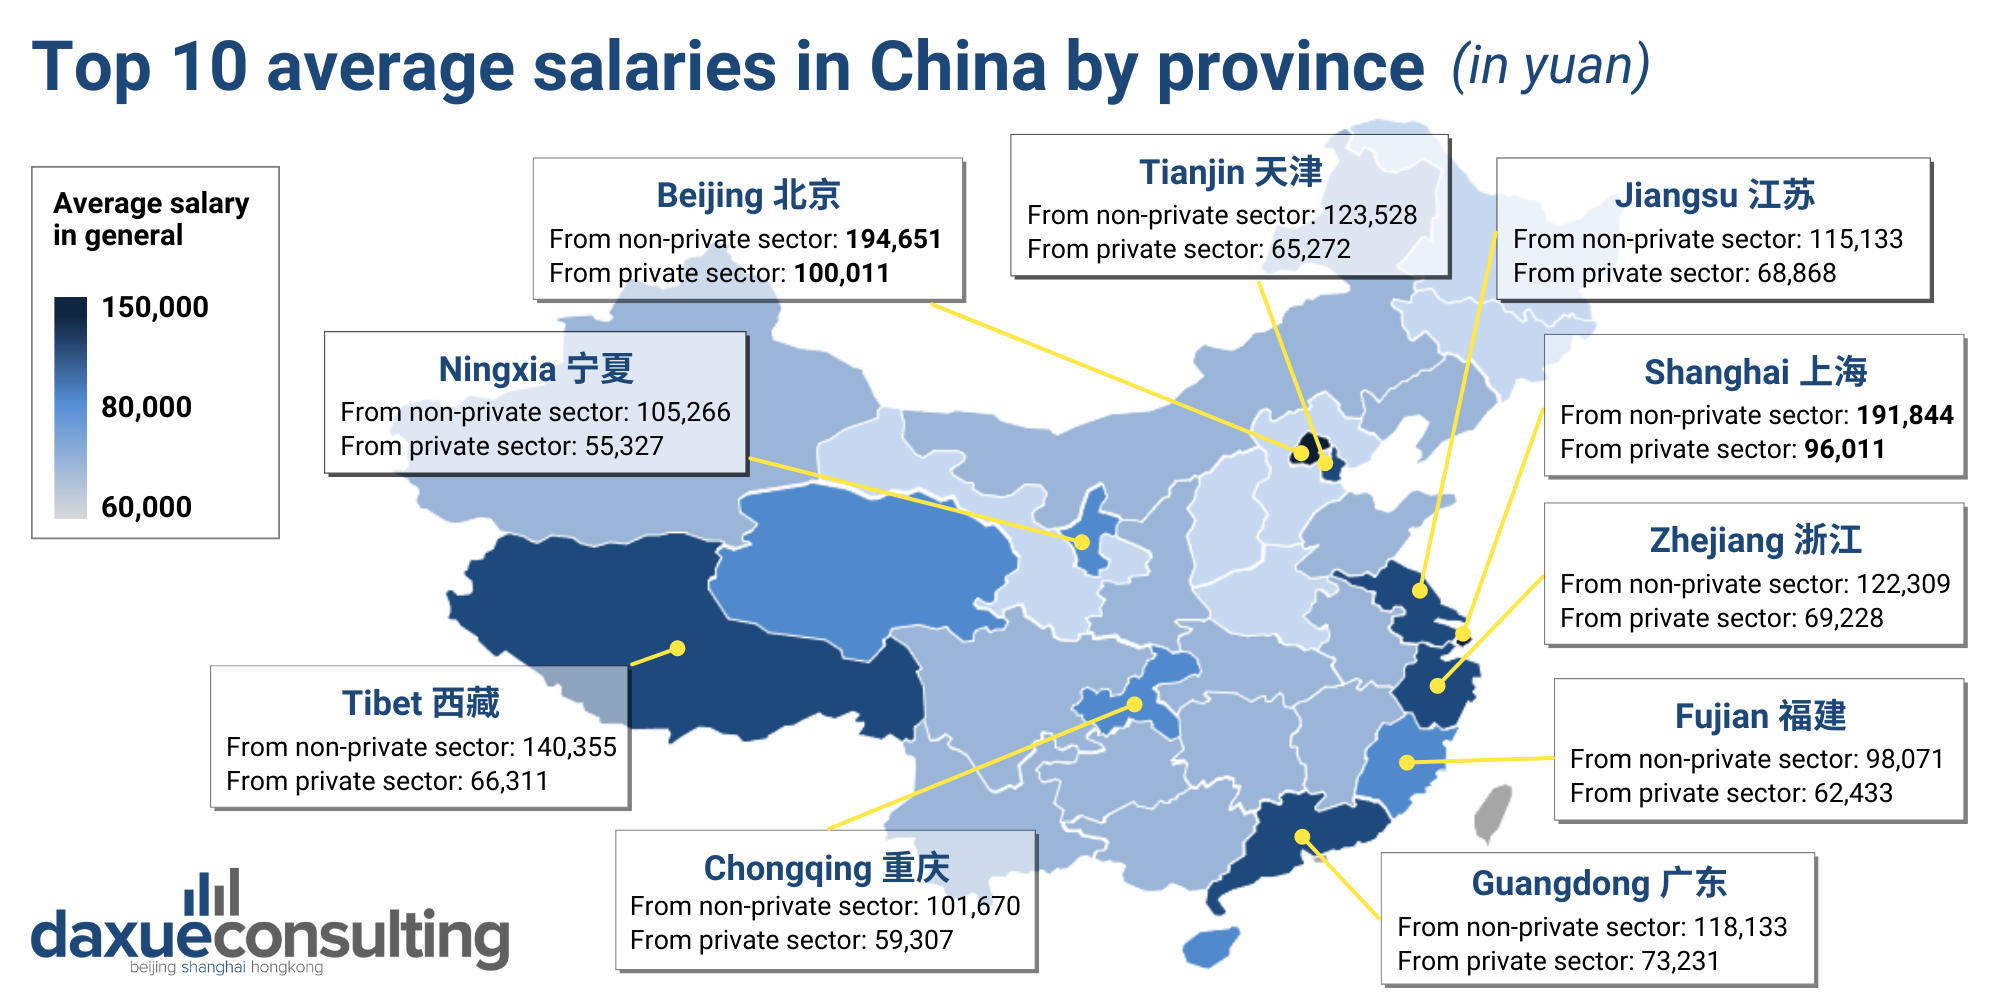 Living Comfortably on an Average Salary in China